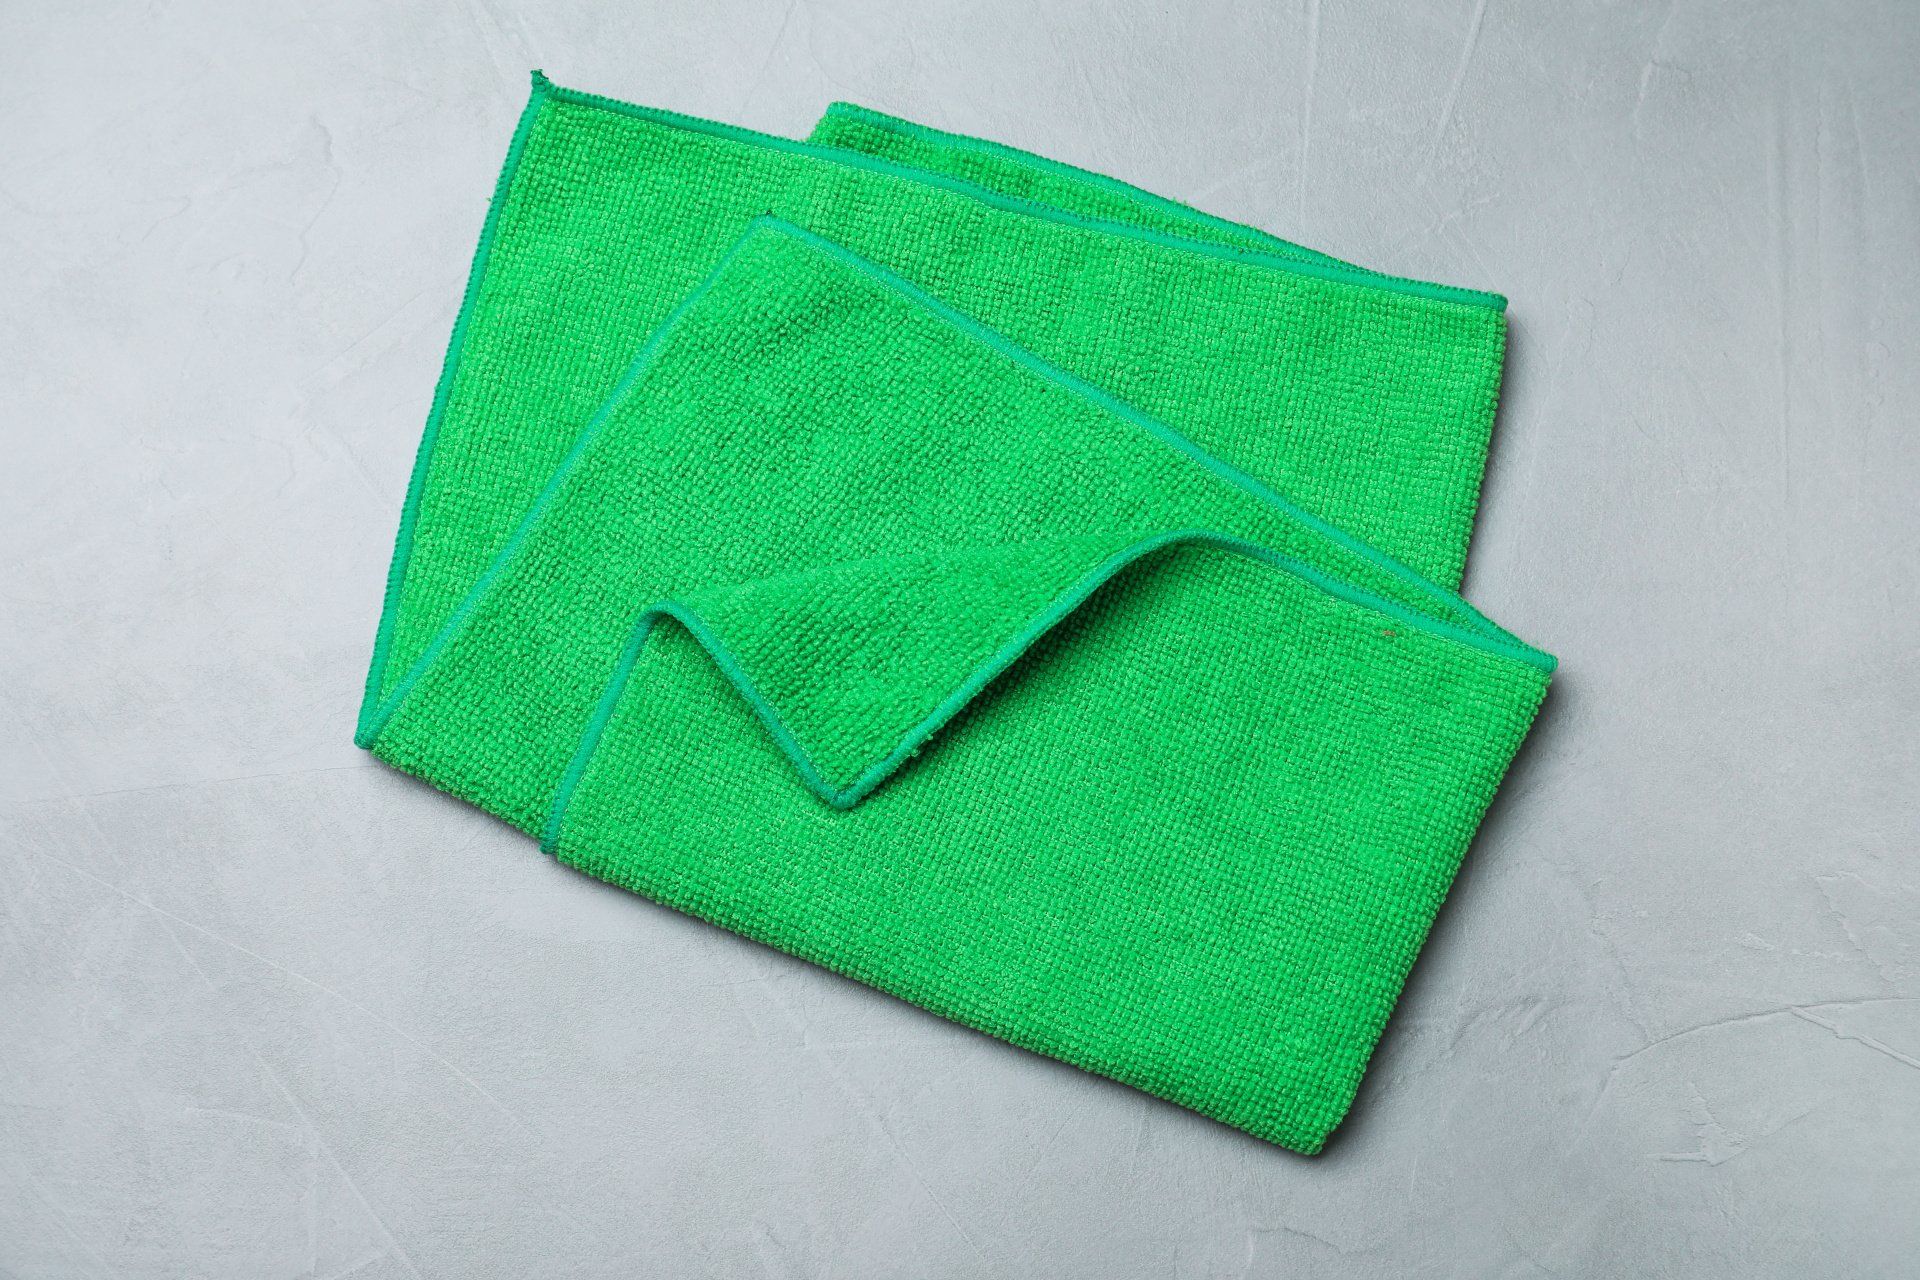 Benefits of Cleaning With Microfiber Towels